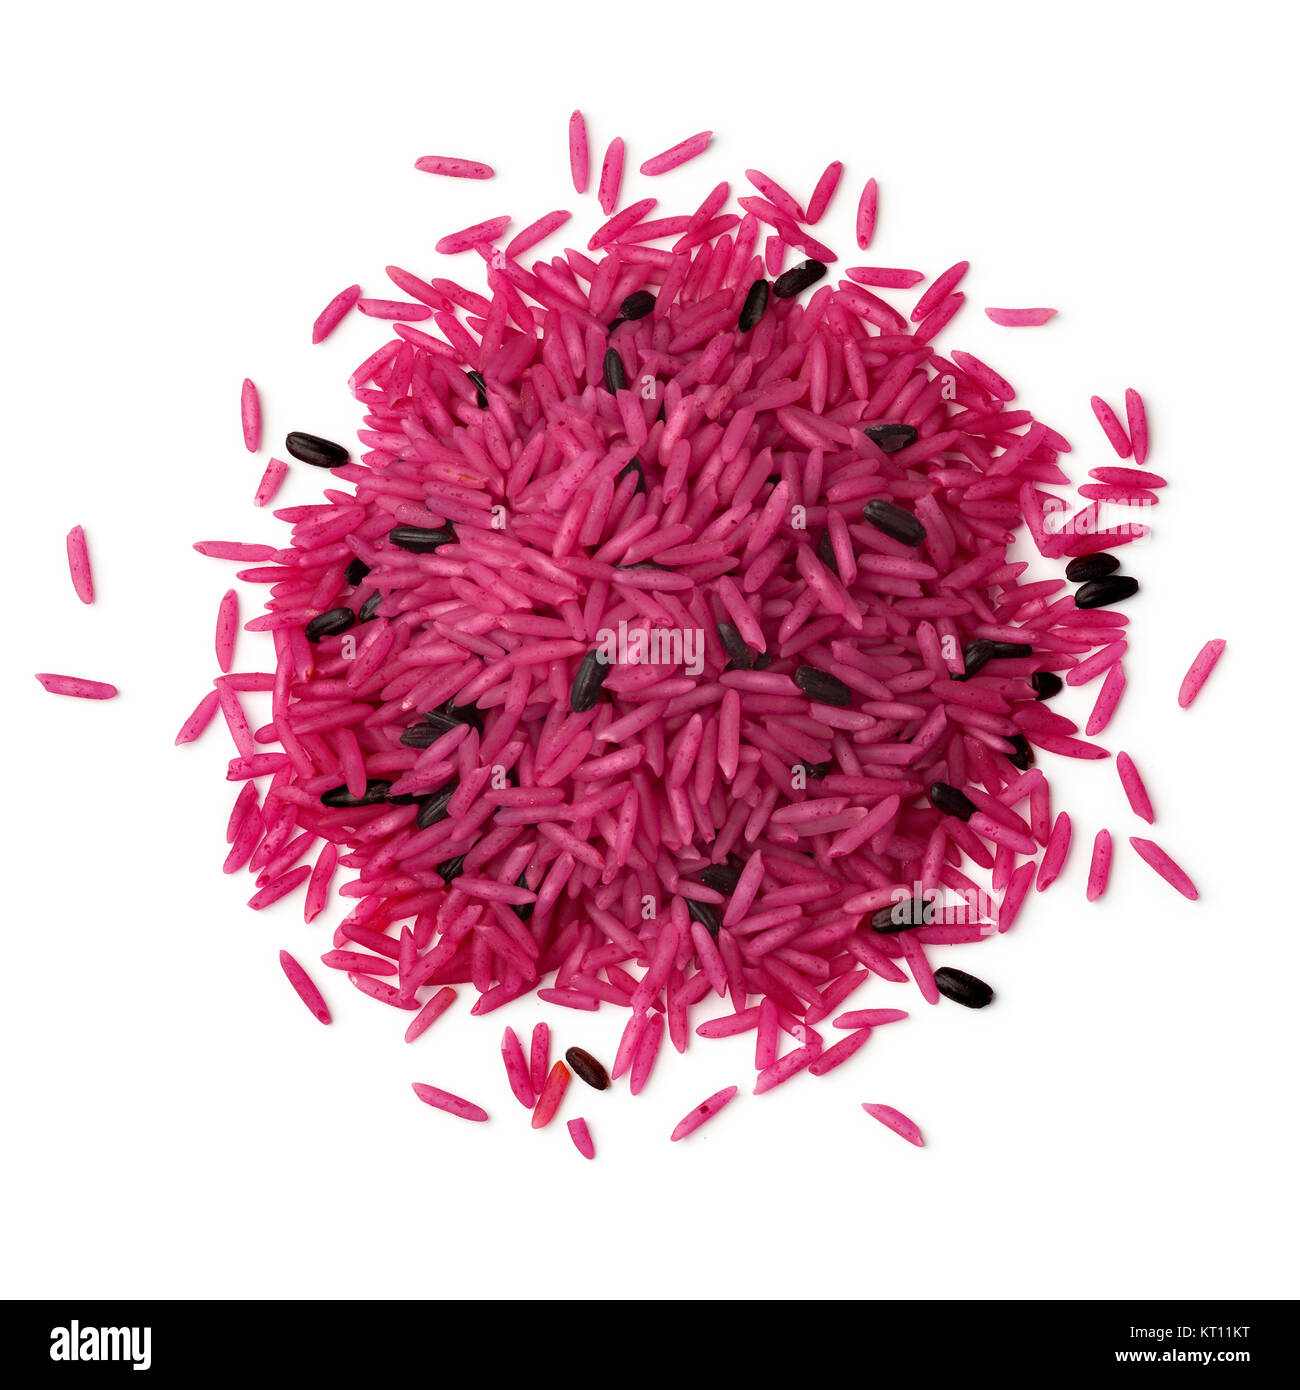 Heap of pink organic rice on white background Stock Photo